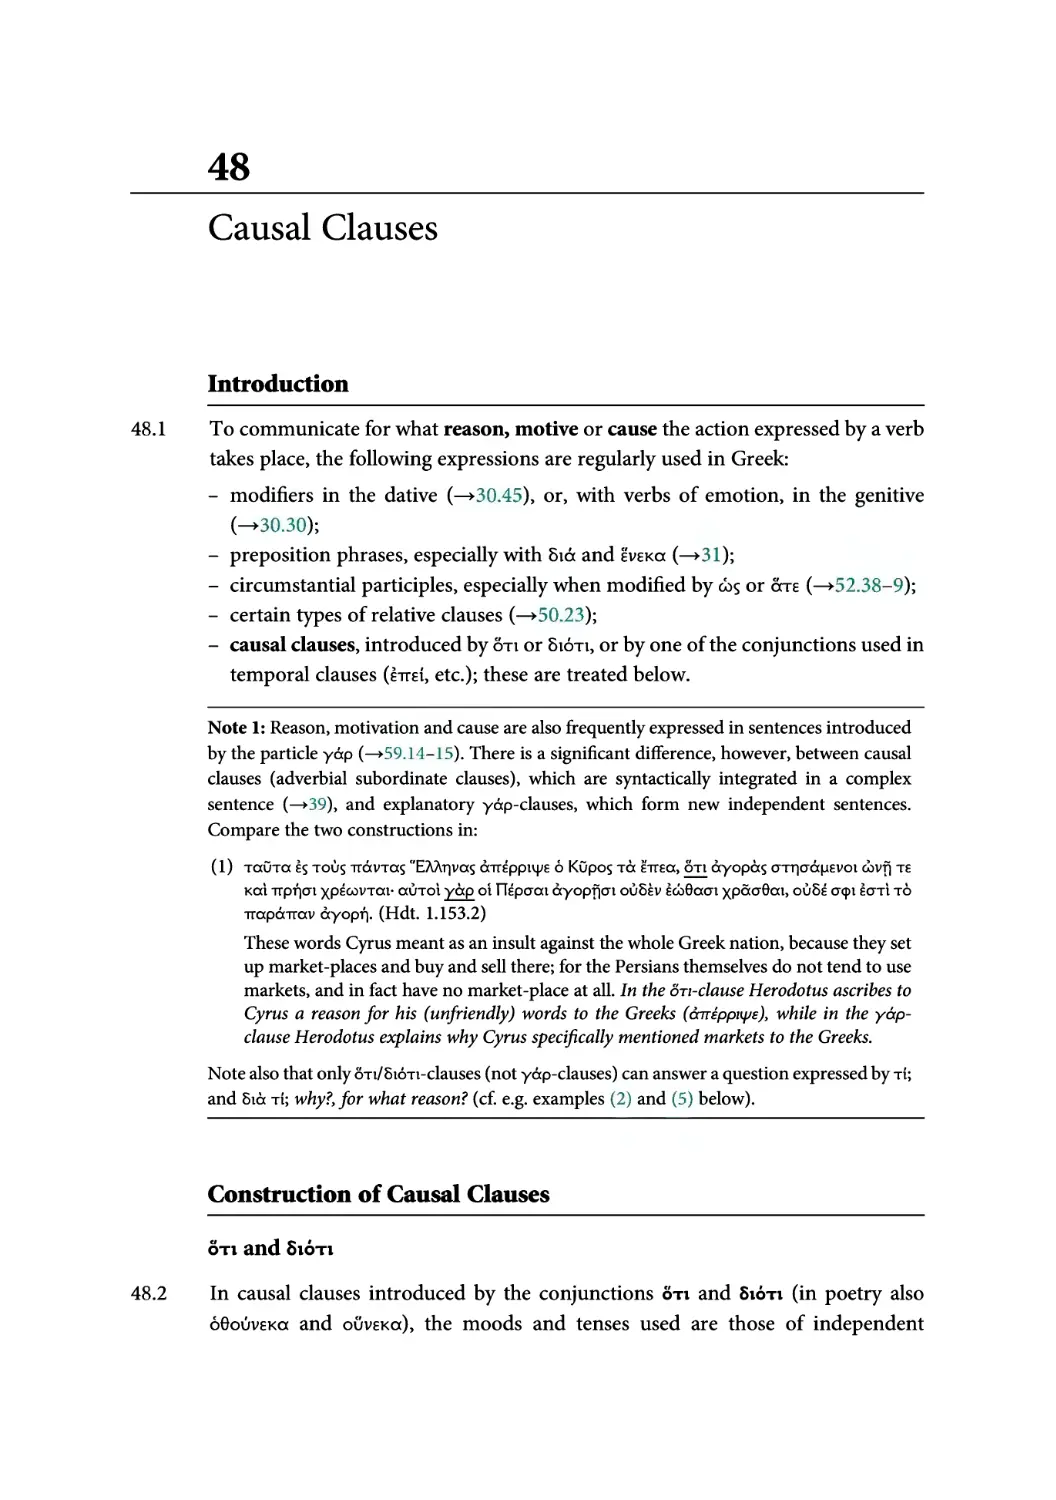 48. Causal Clauses